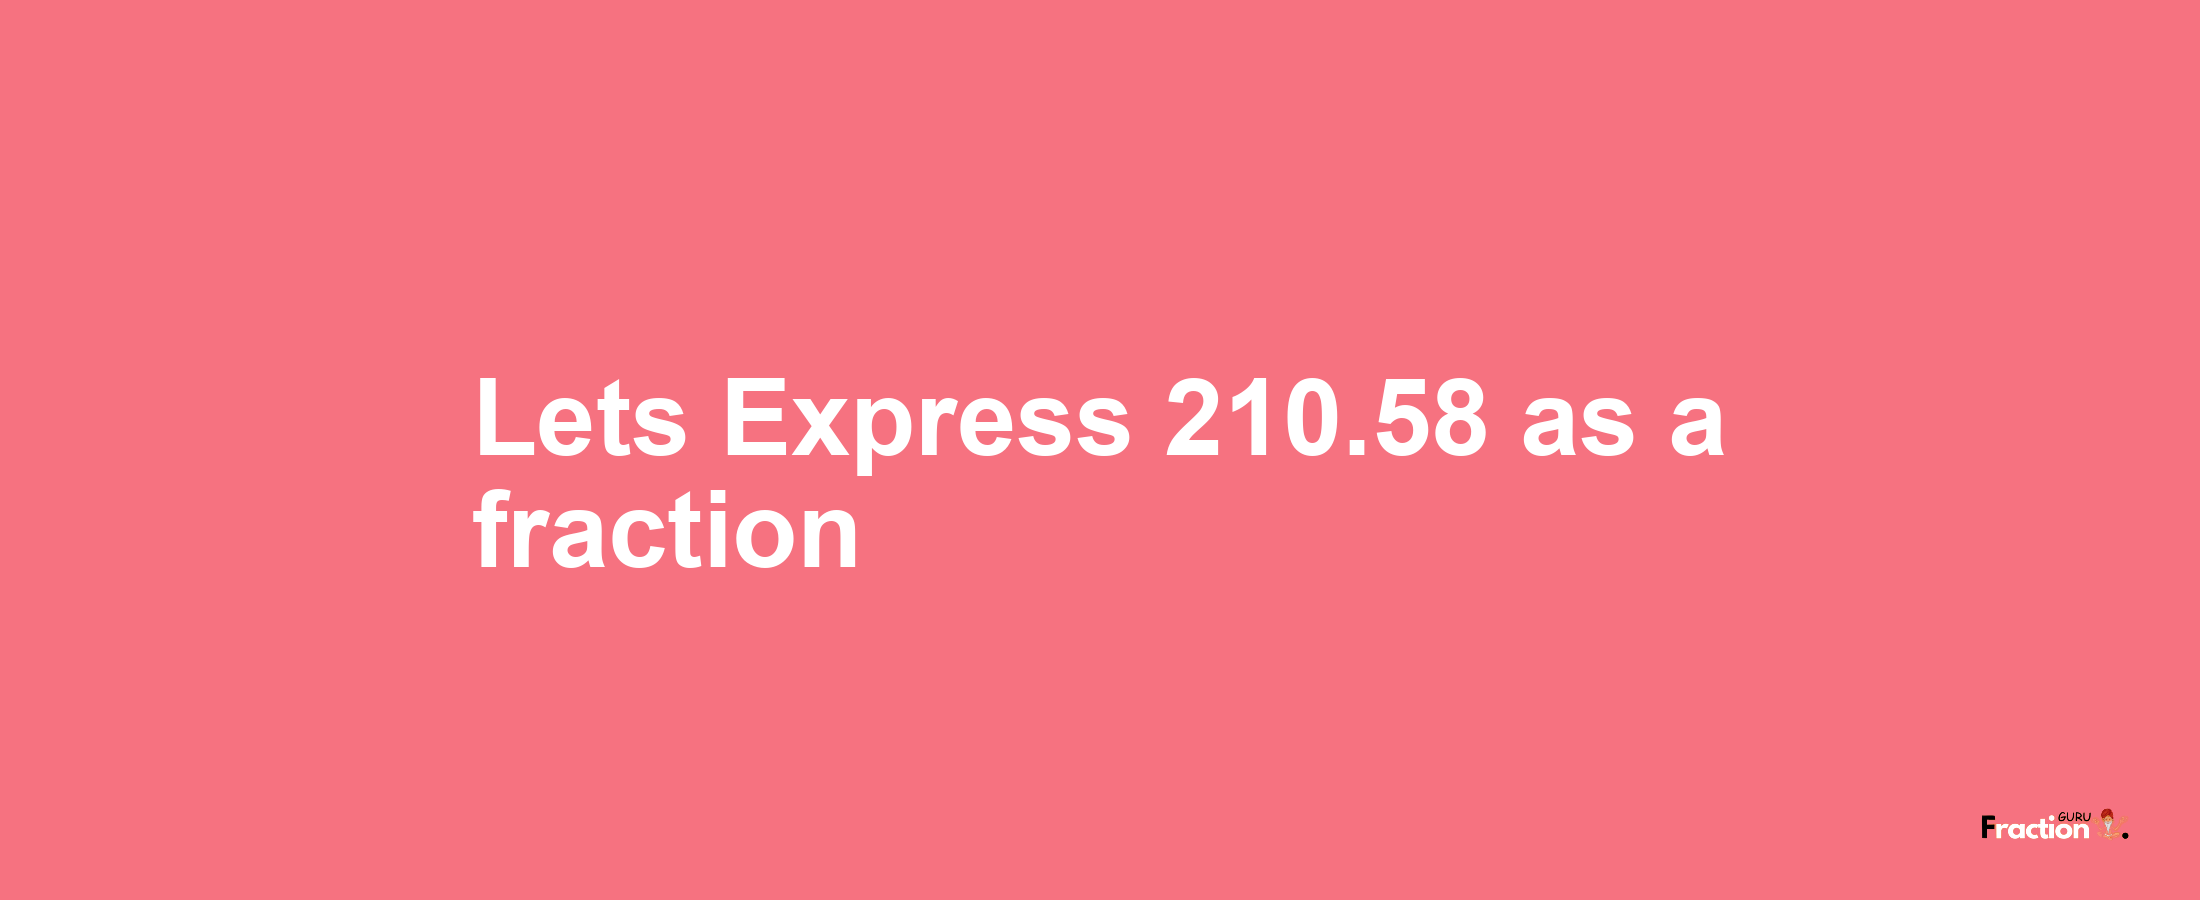 Lets Express 210.58 as afraction